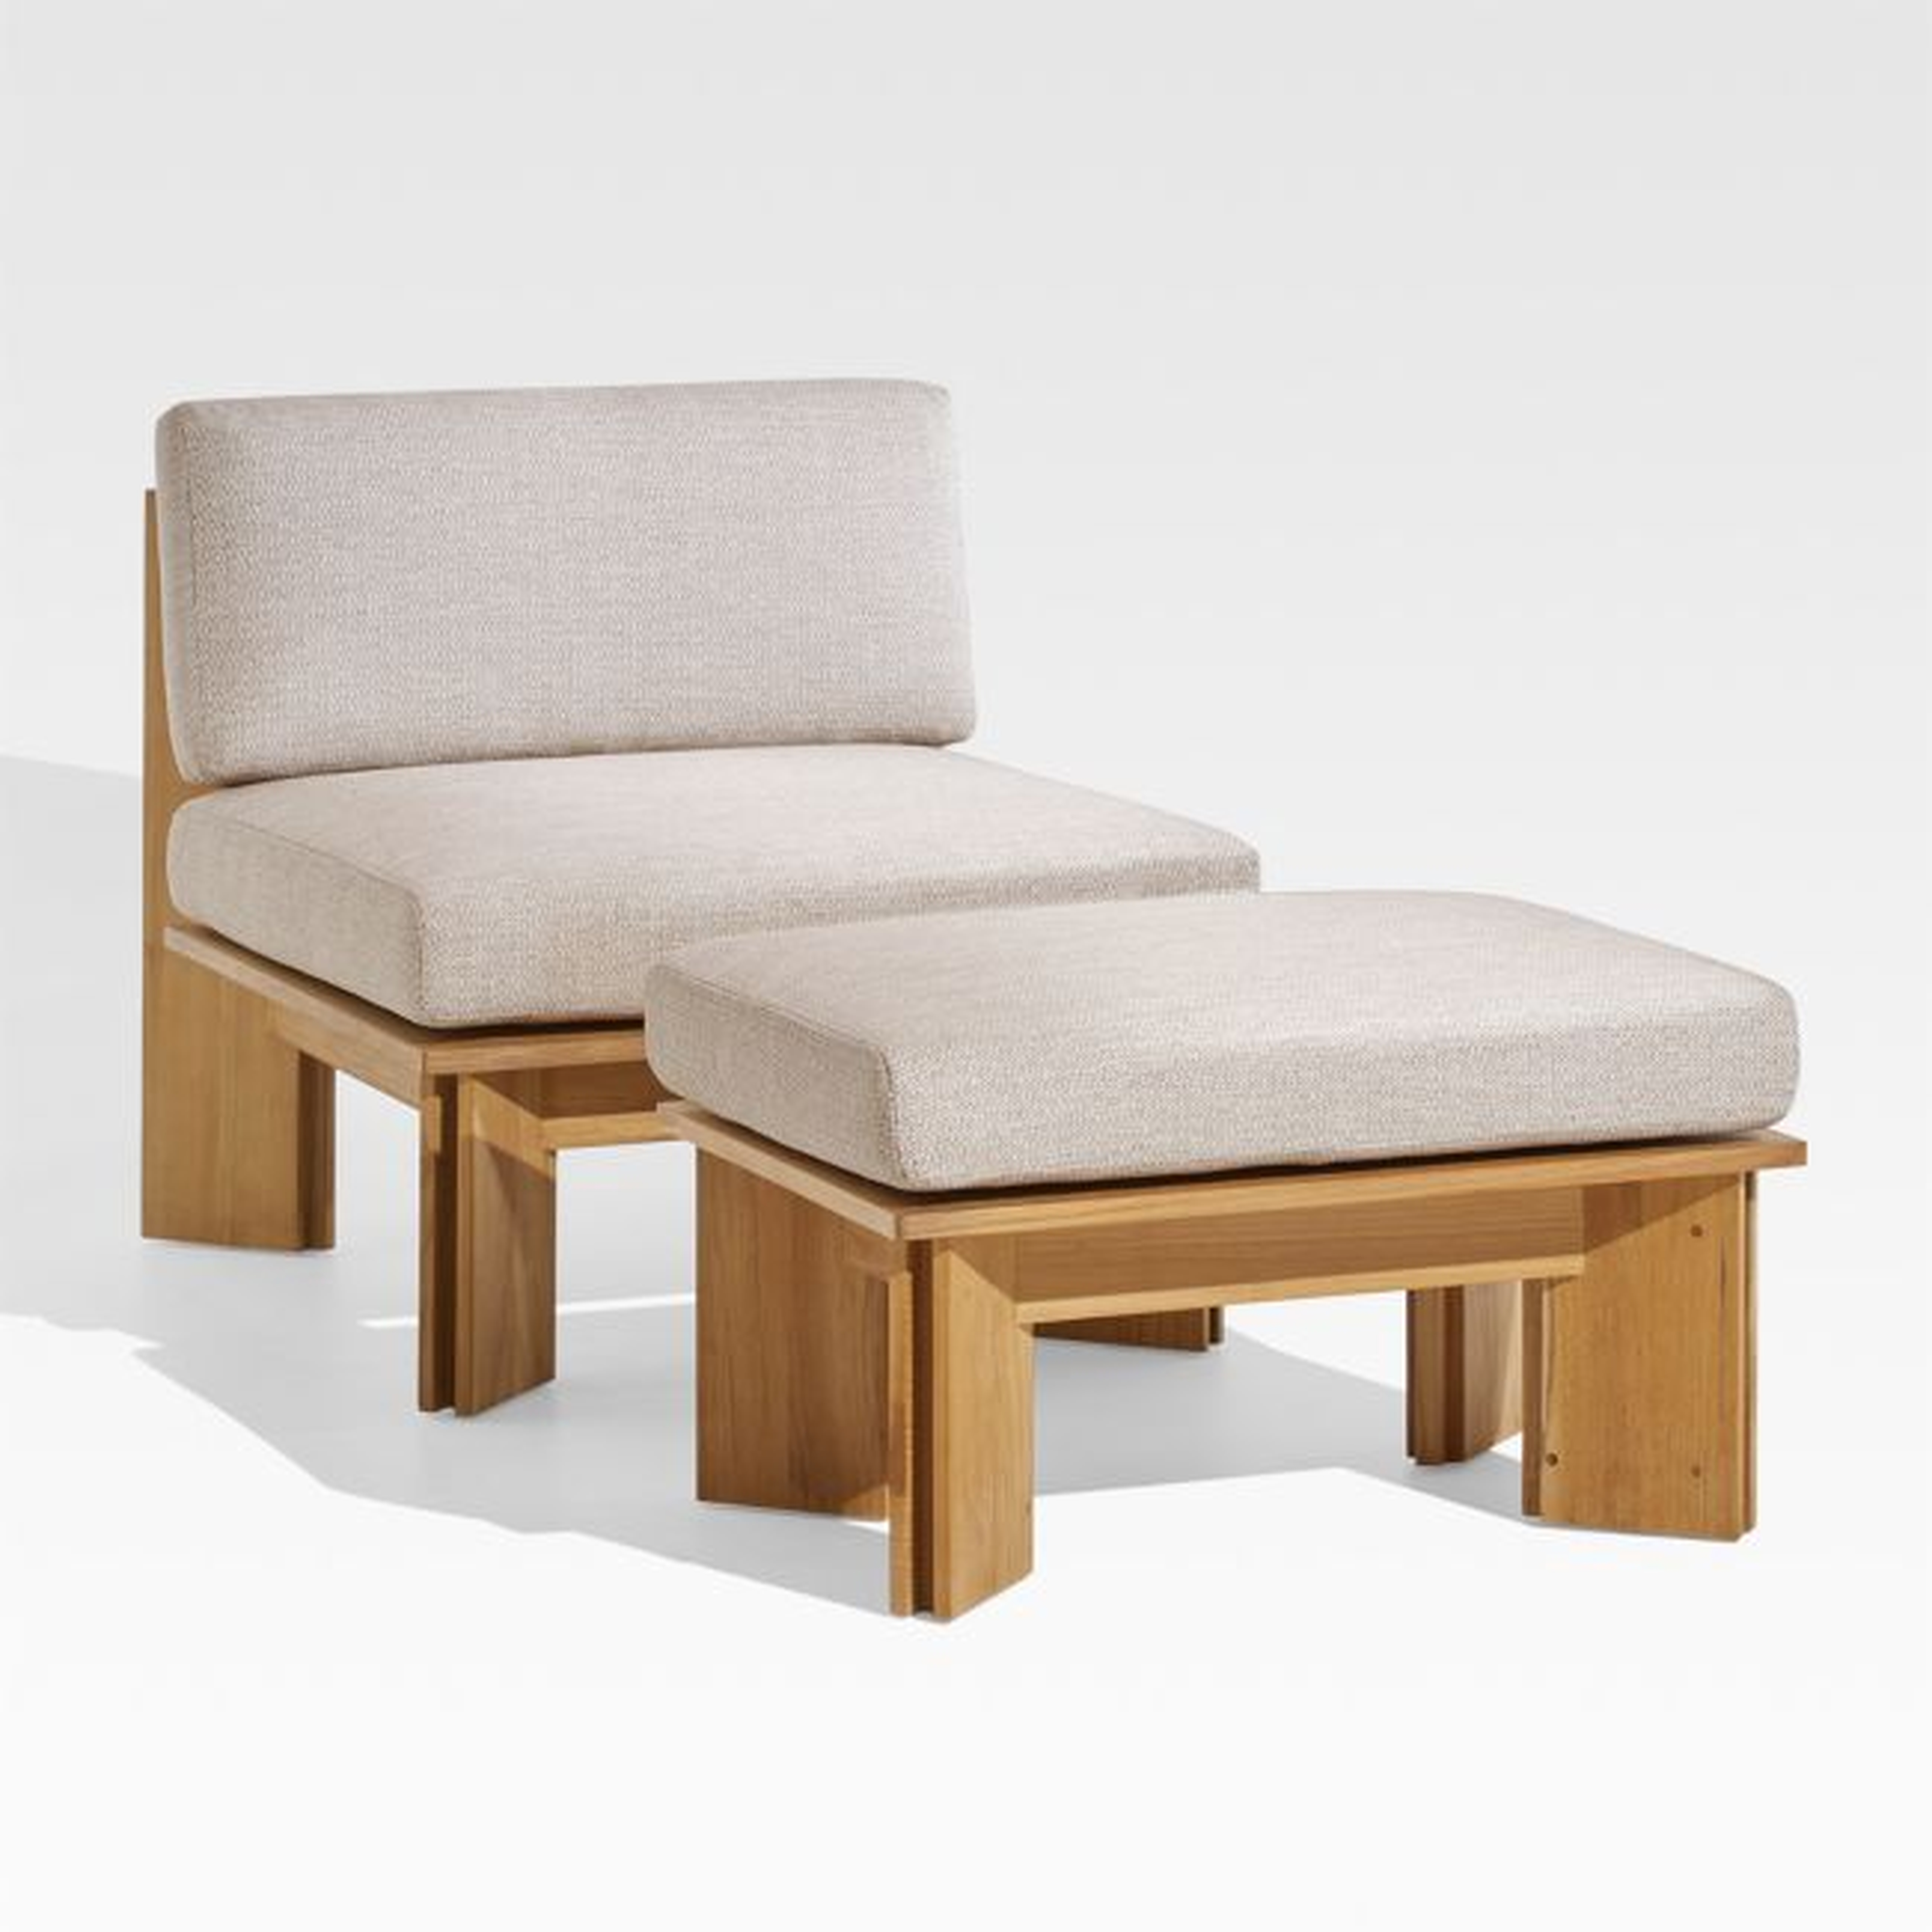 Olivos Teak Outdoor Lounge Chair with Ottoman - Crate and Barrel